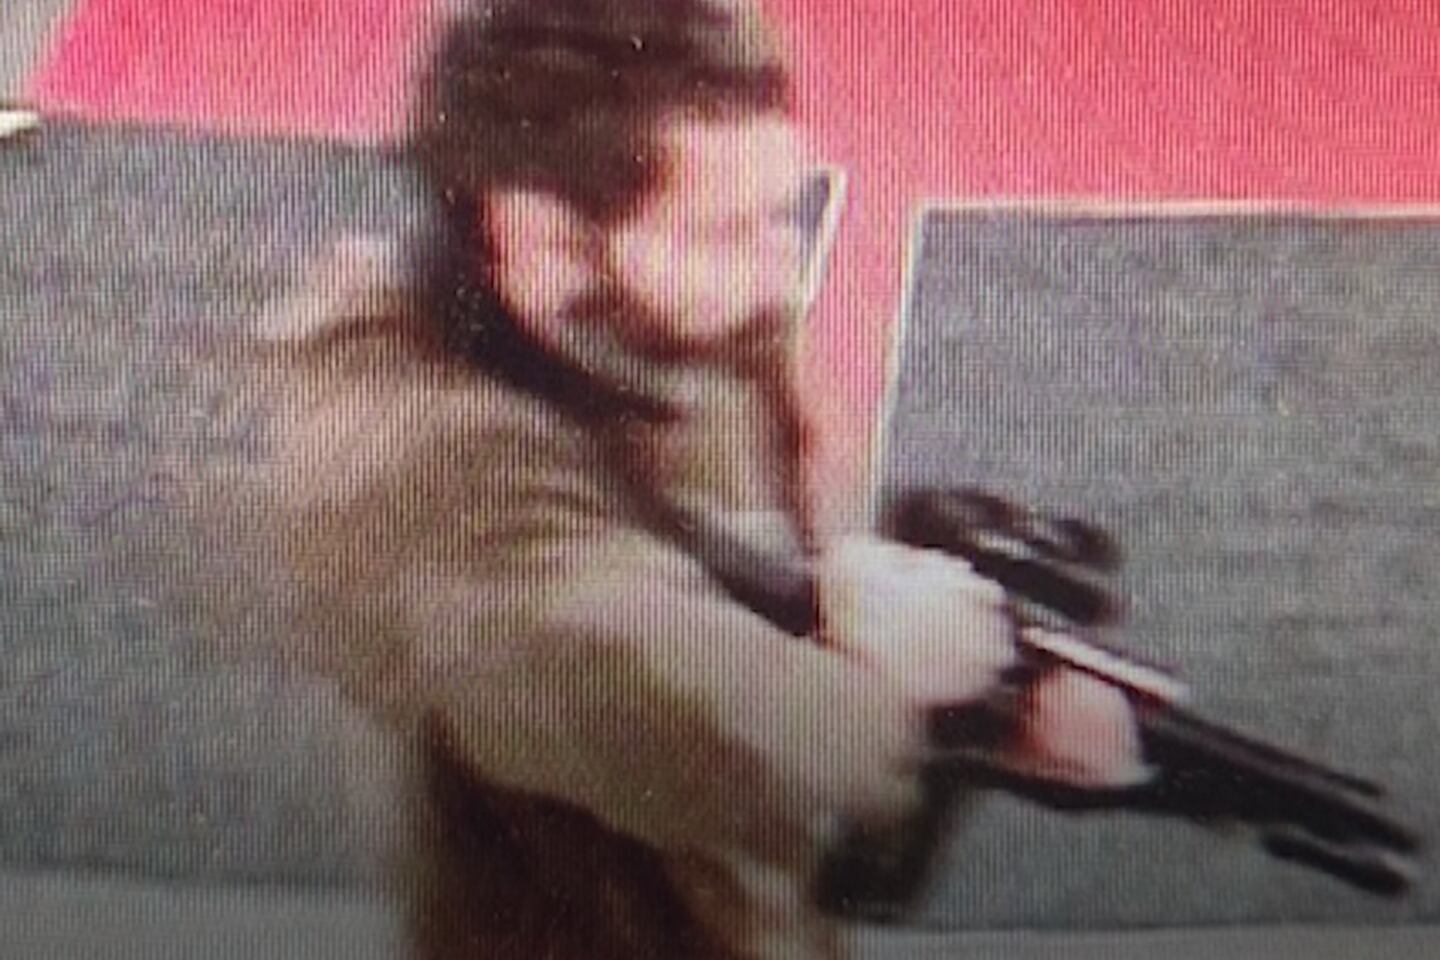 Photos of suspected gunman in Maine shooting revealed